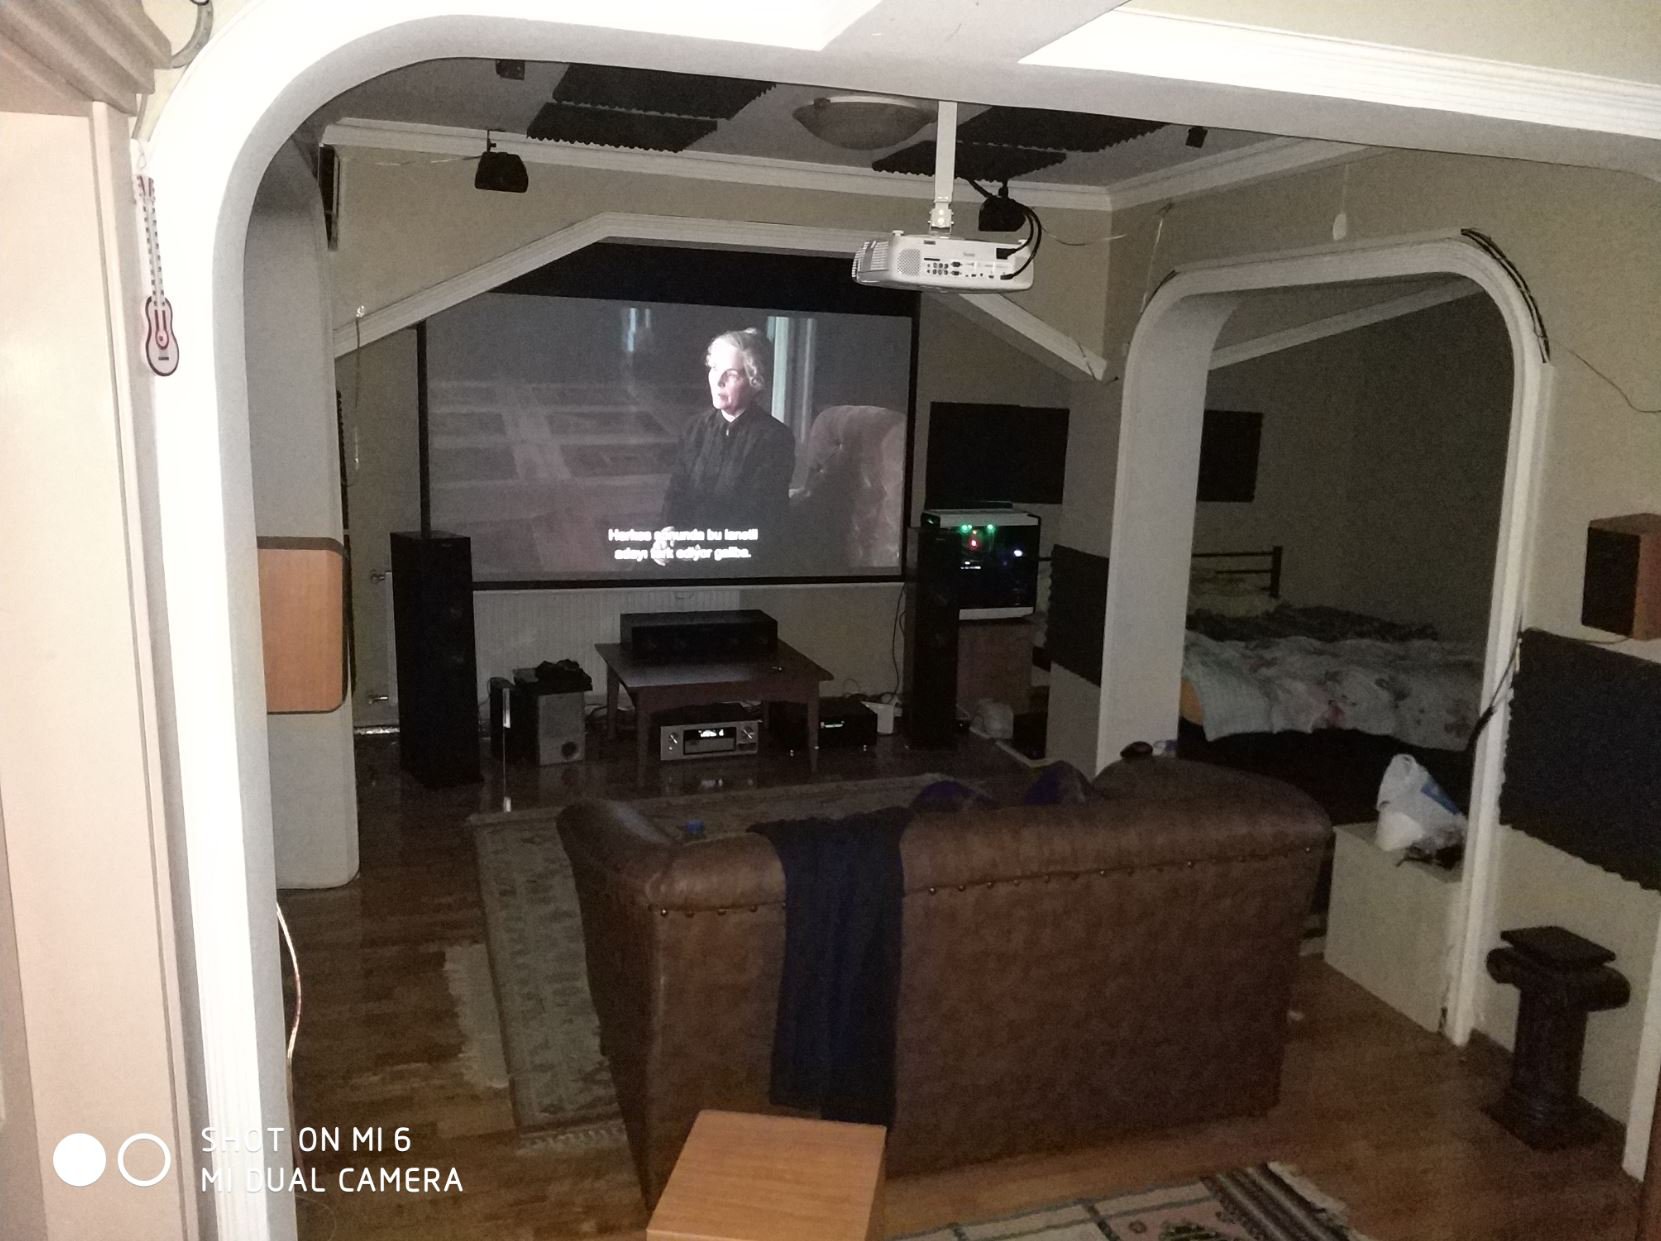 My Dolby Atmos Setup! 7.1.4 (now 7.2.4) Surround Sound Home Theater –  HOTMILLK